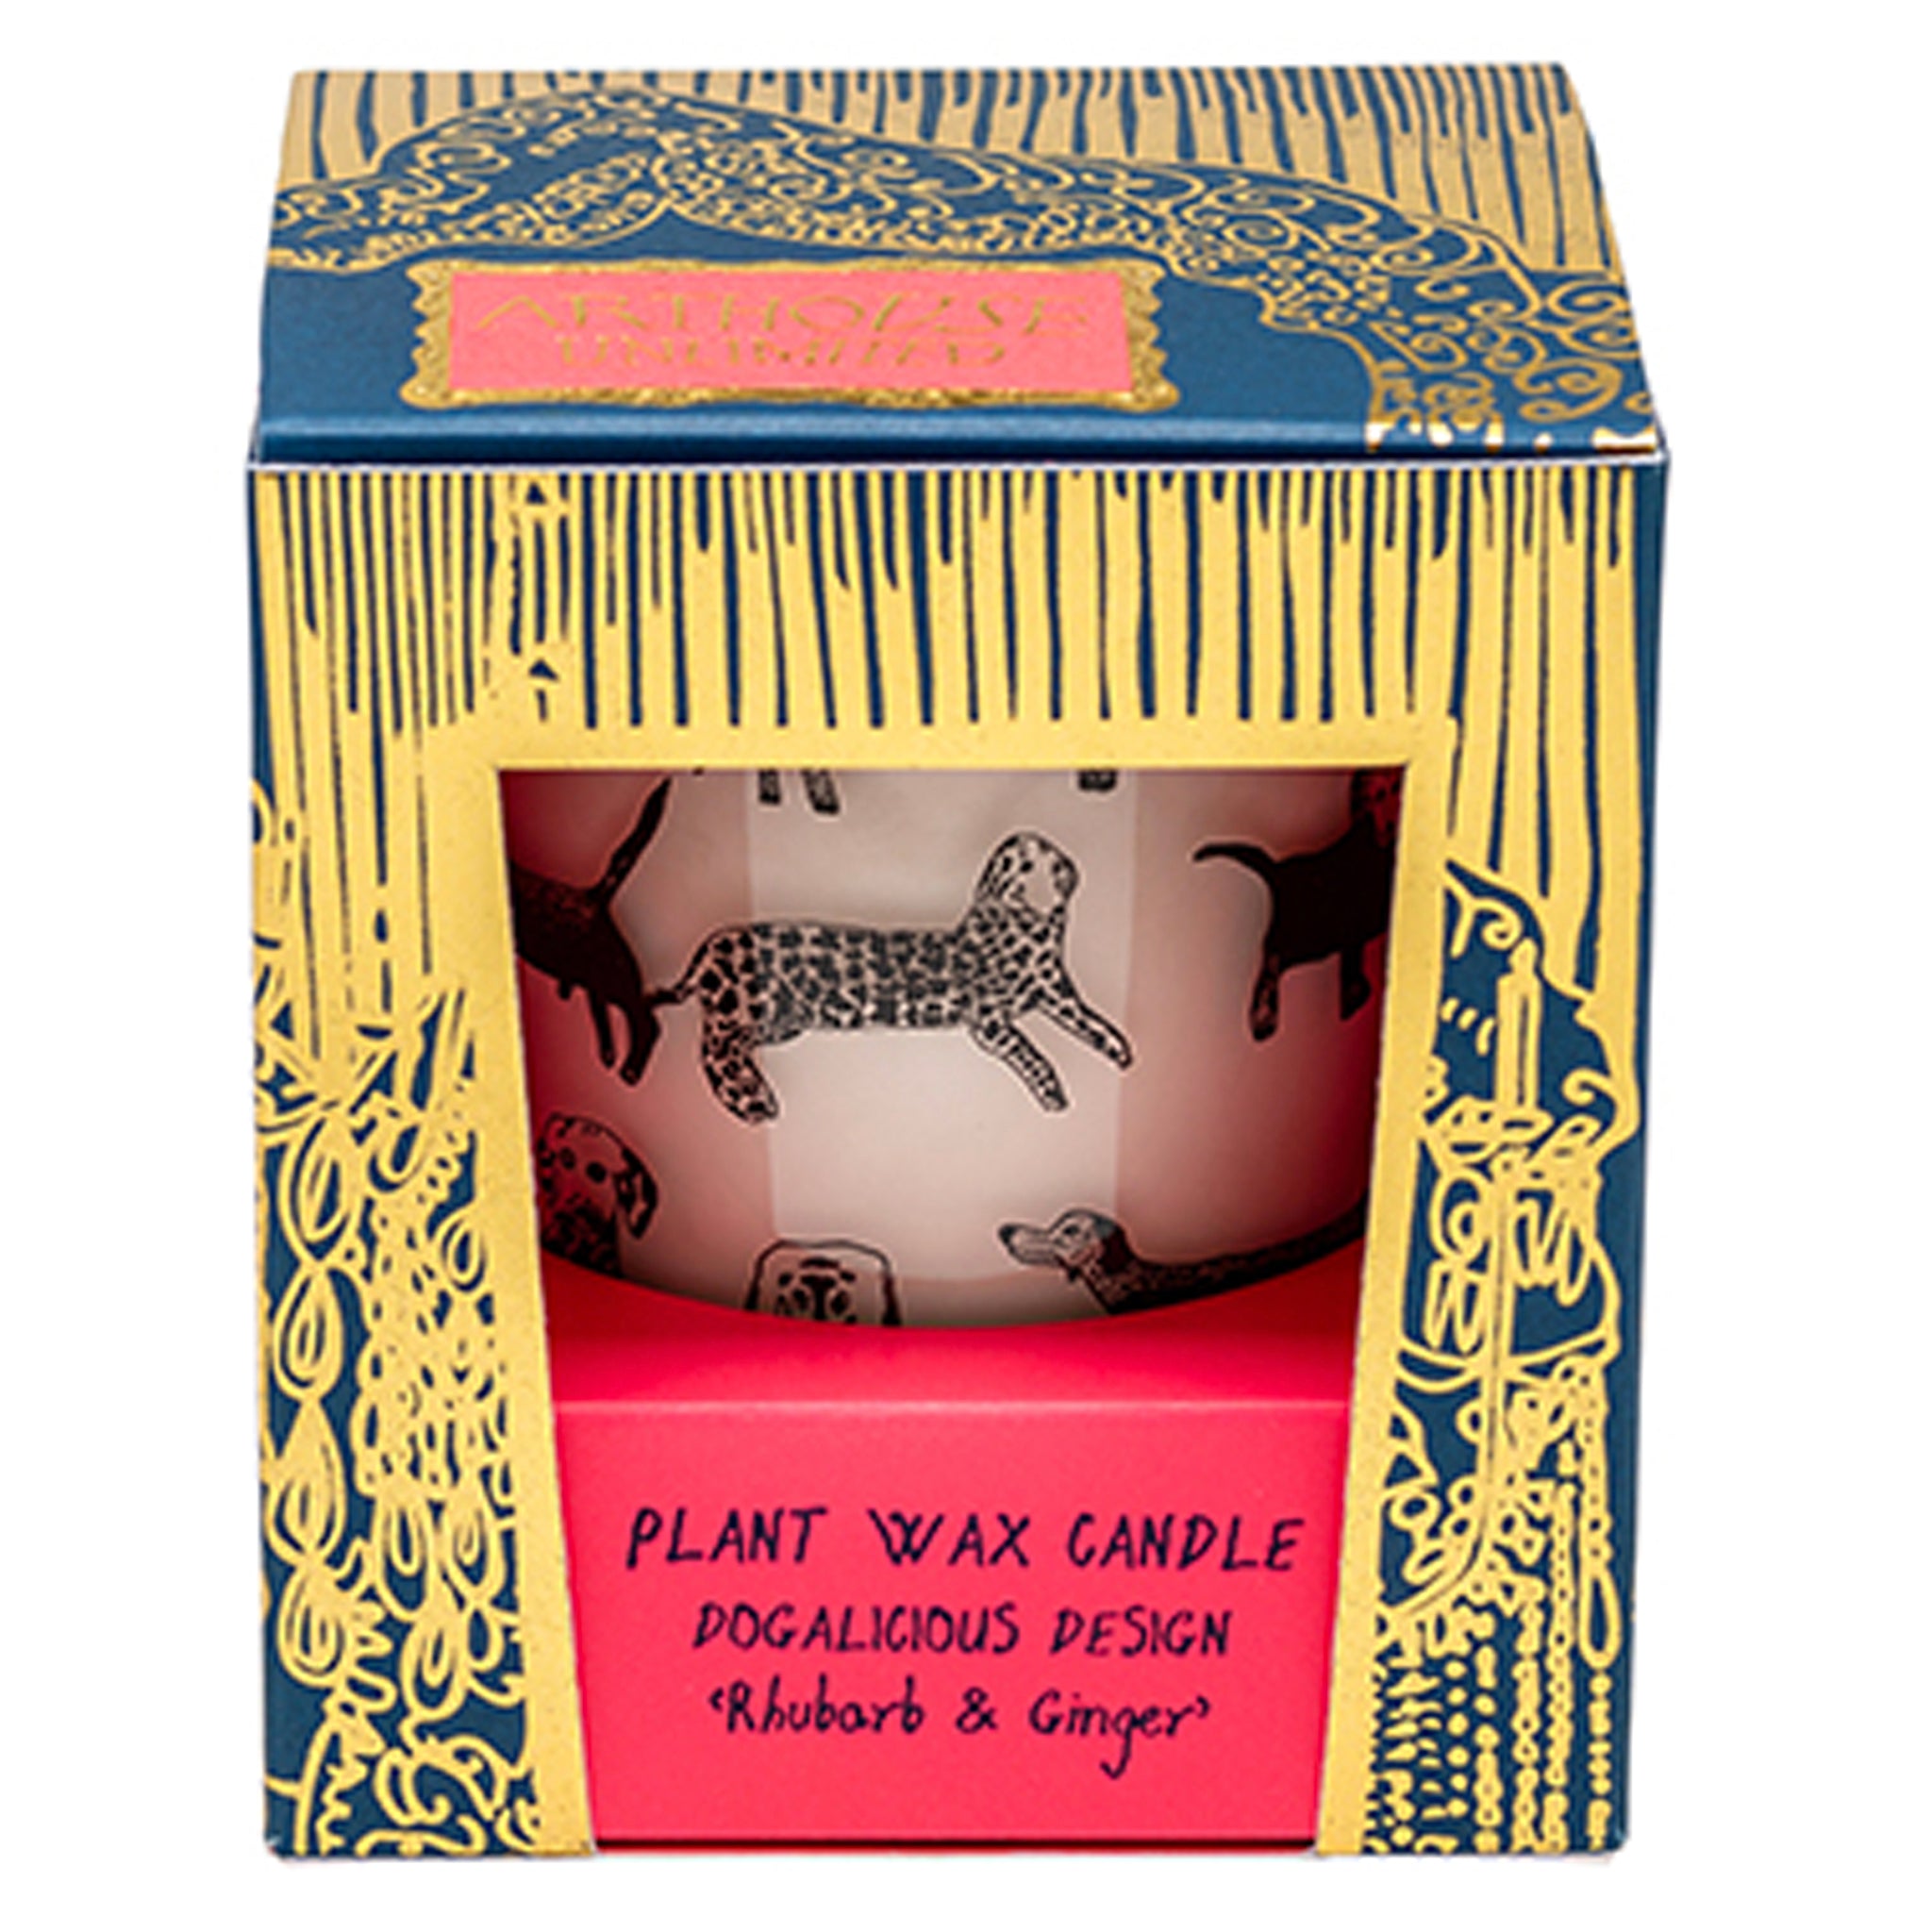 Dogalicious, Rhubarb & Ginger Plant Wax Candle in blue, pink and gold box